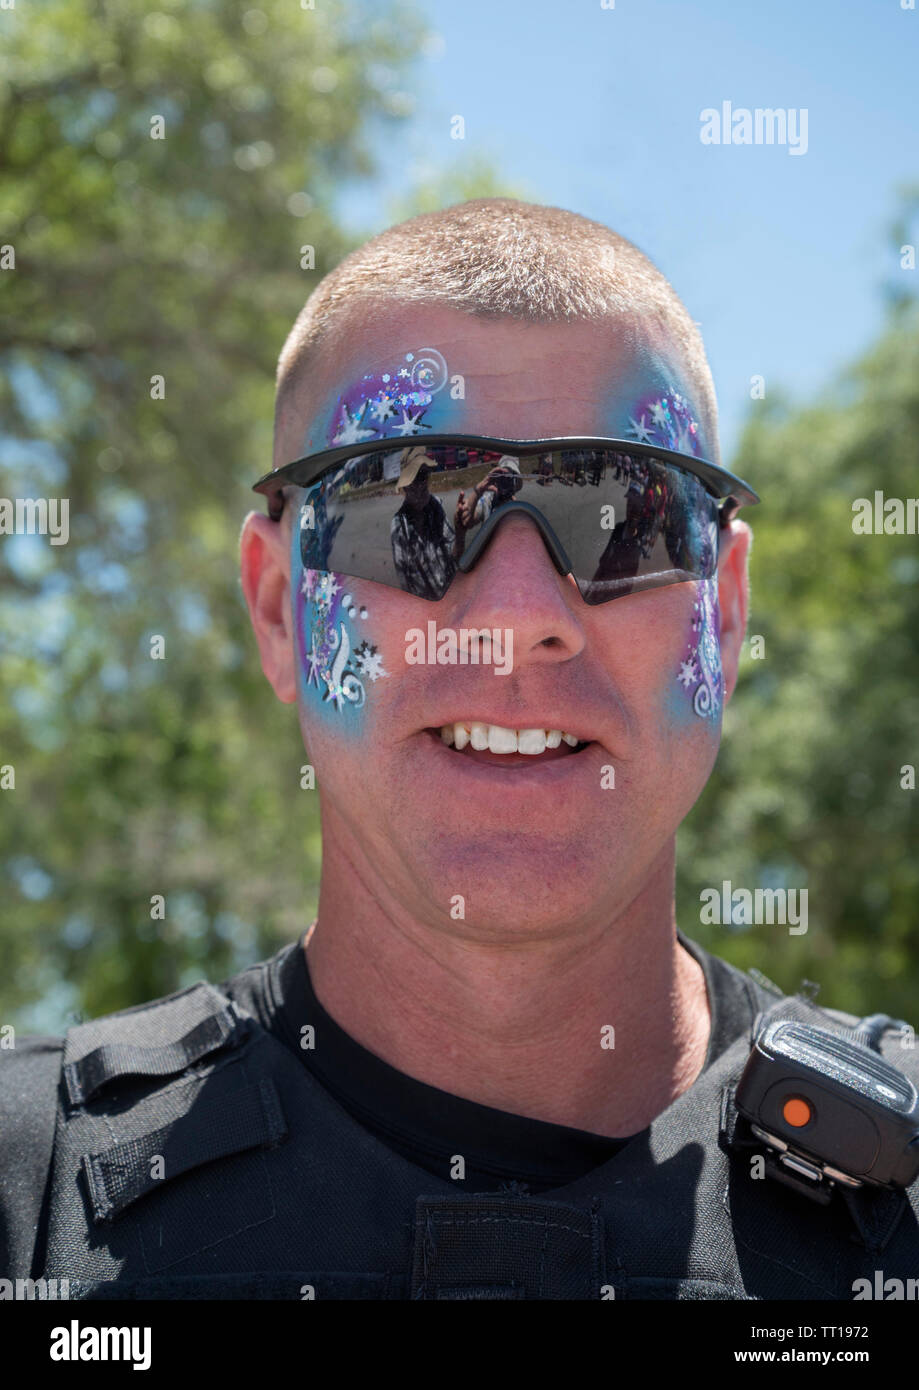 Pioneer Days small town annual celebration in North Central Florida. High Springs, FL police officer with face paint on. Stock Photo